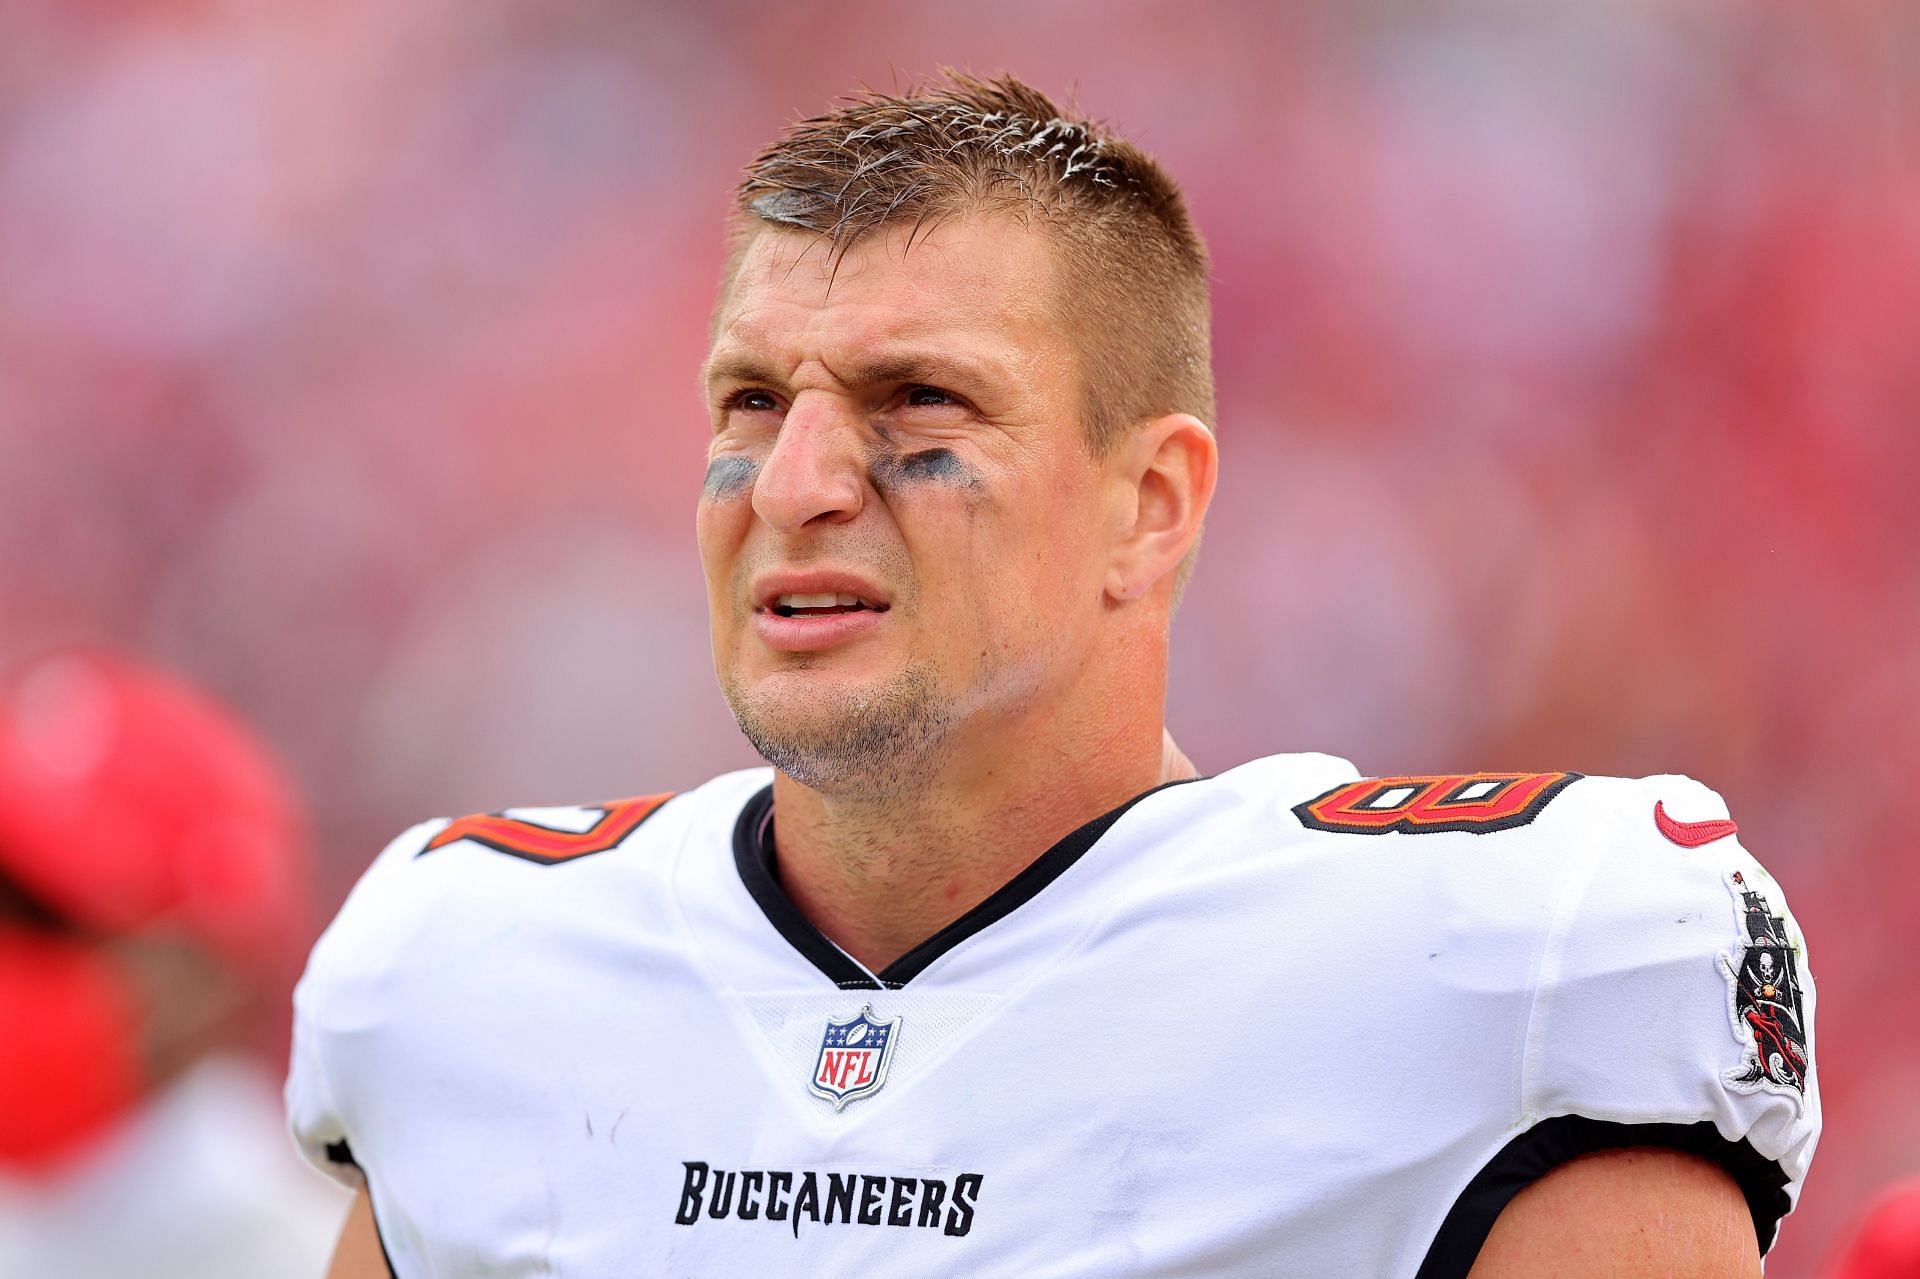 Rob Gronkowski already has a burgeoning career in acting